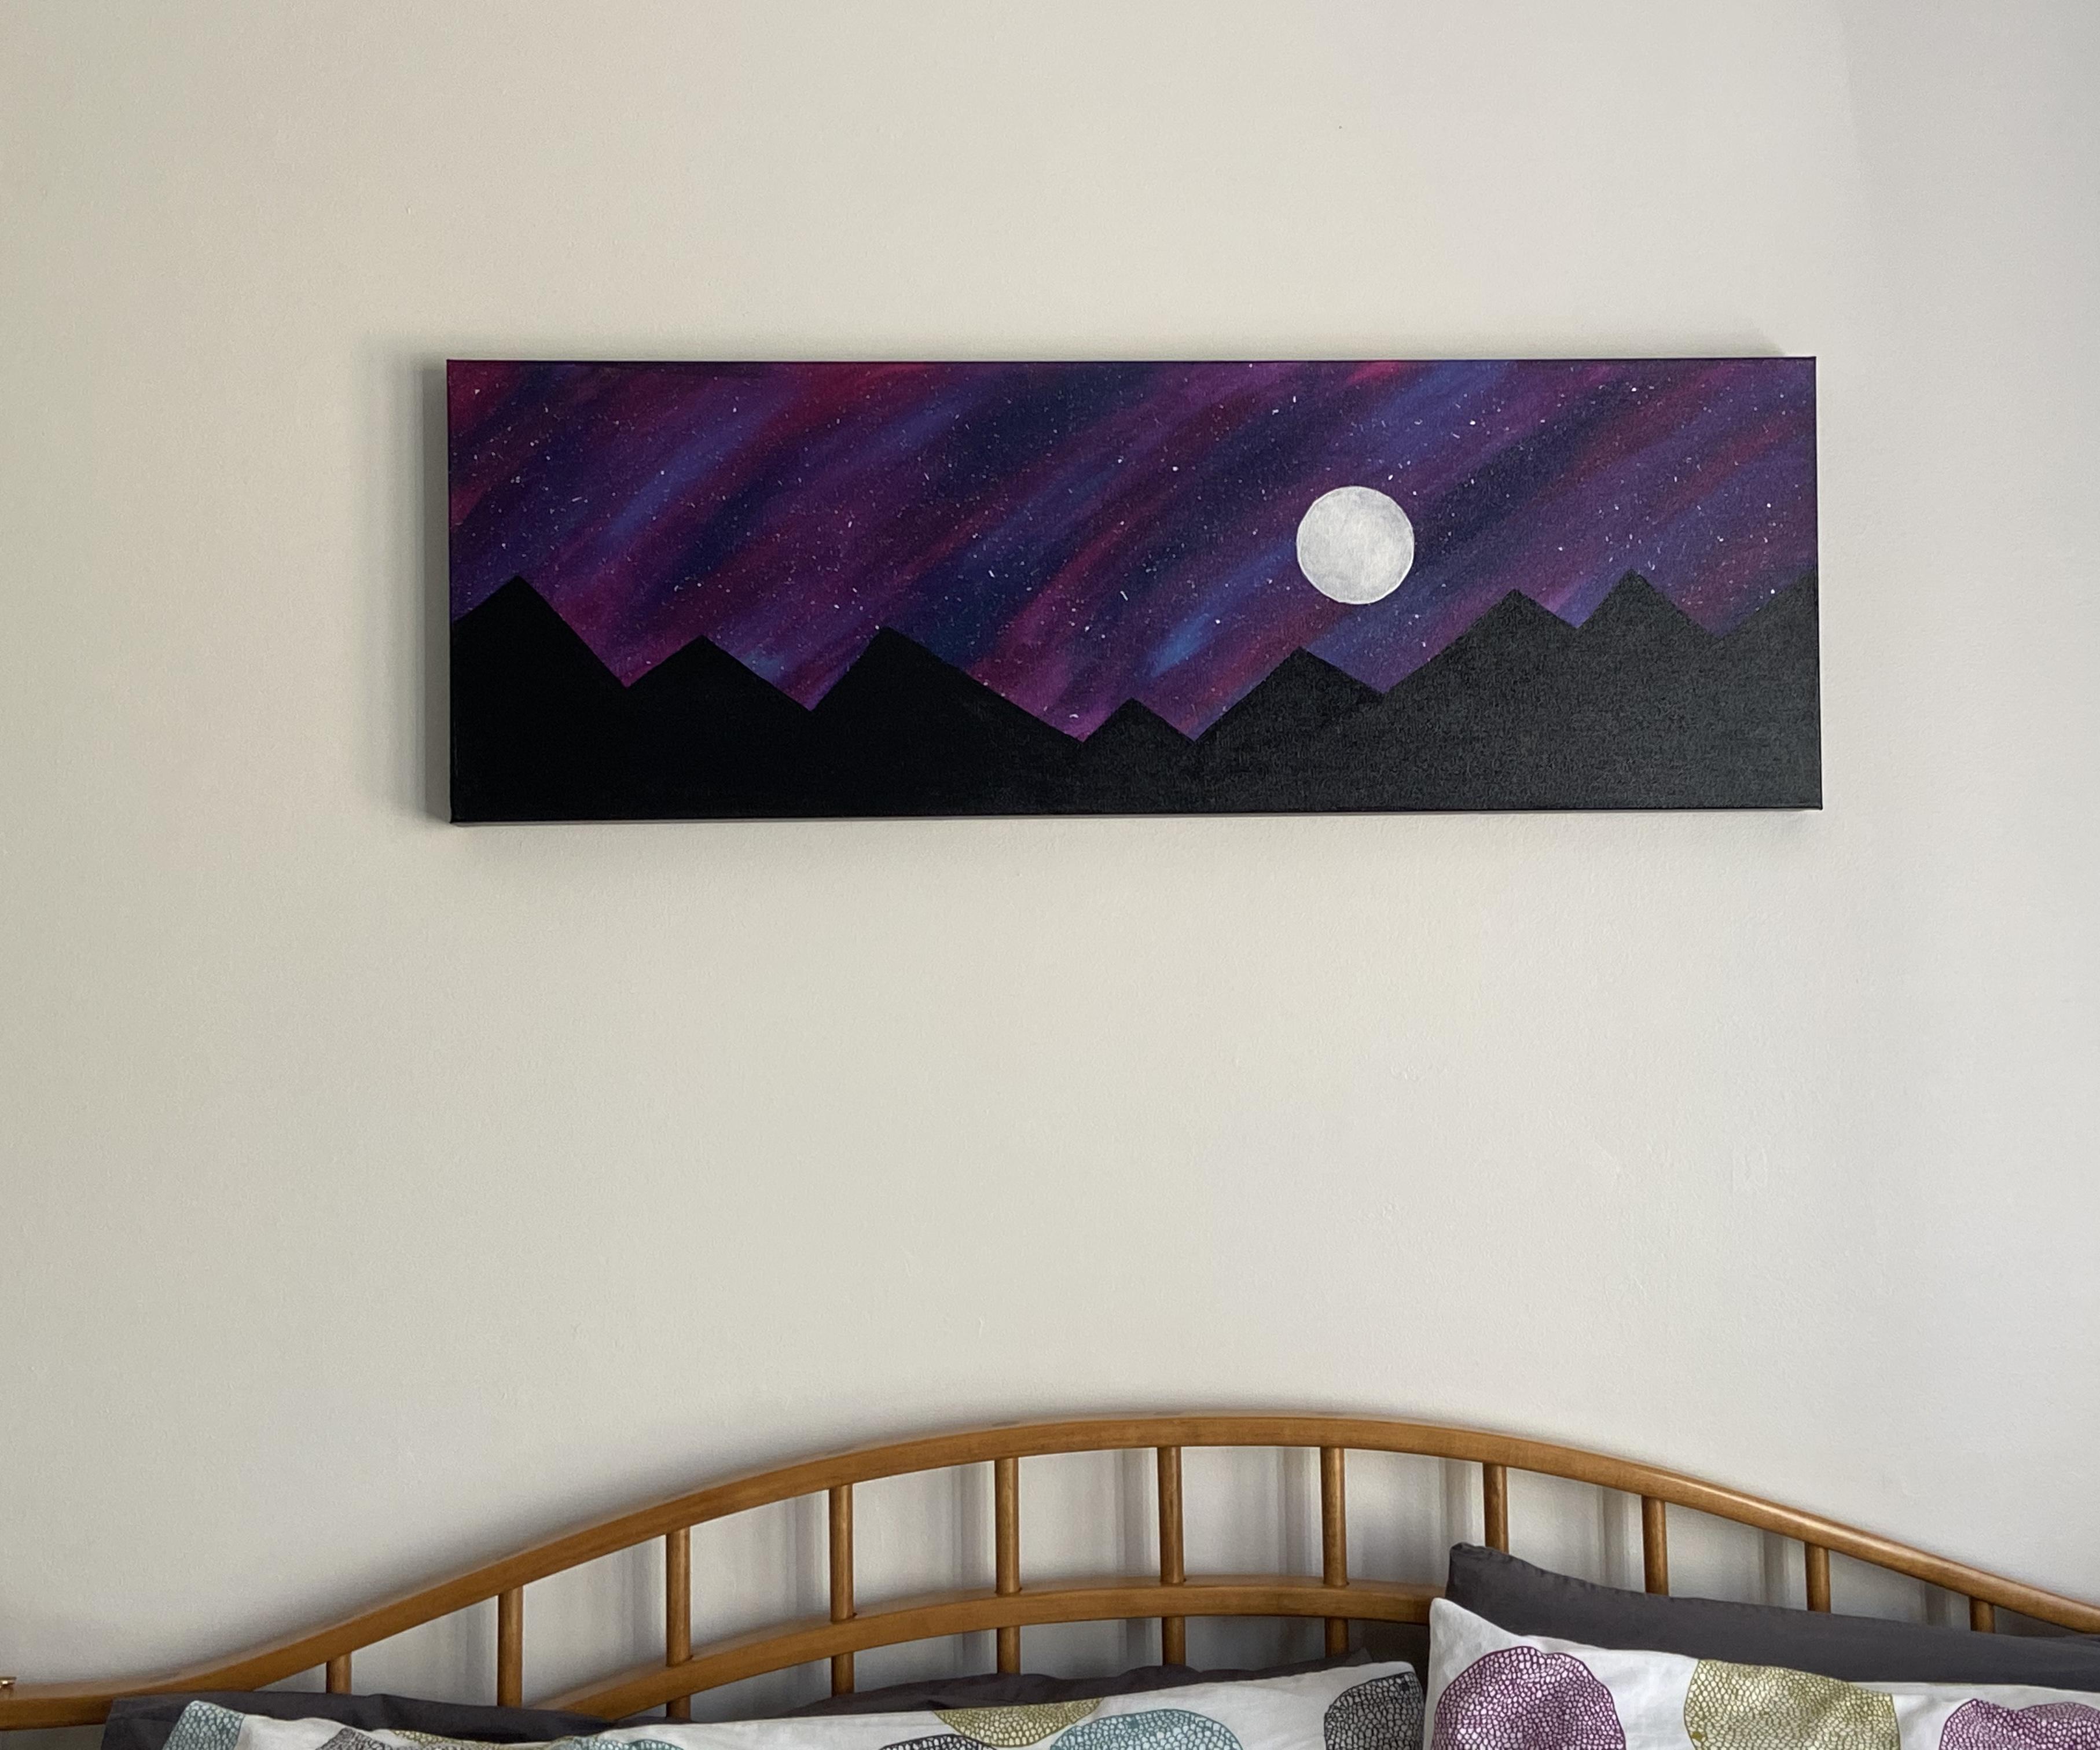 How to Paint a Galaxy and Mountains